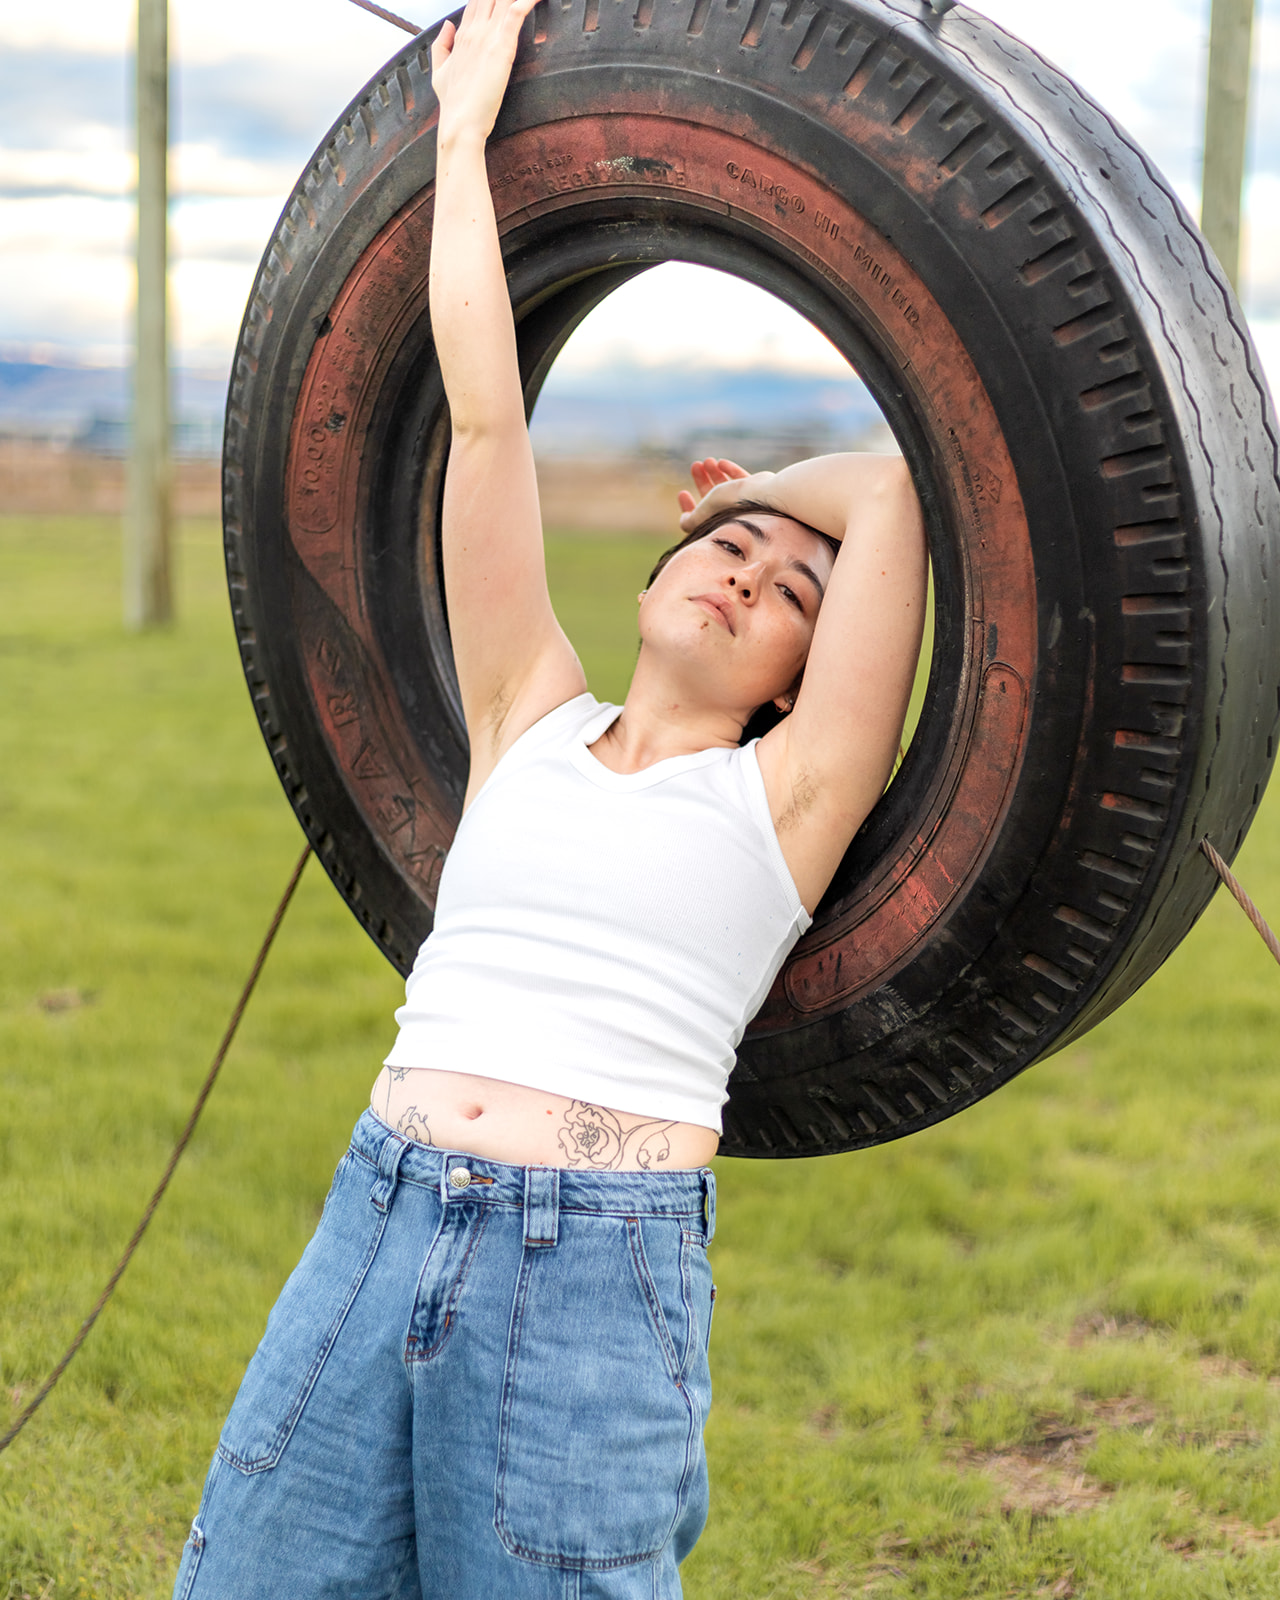 editorial photo of genderfluid person and old tire